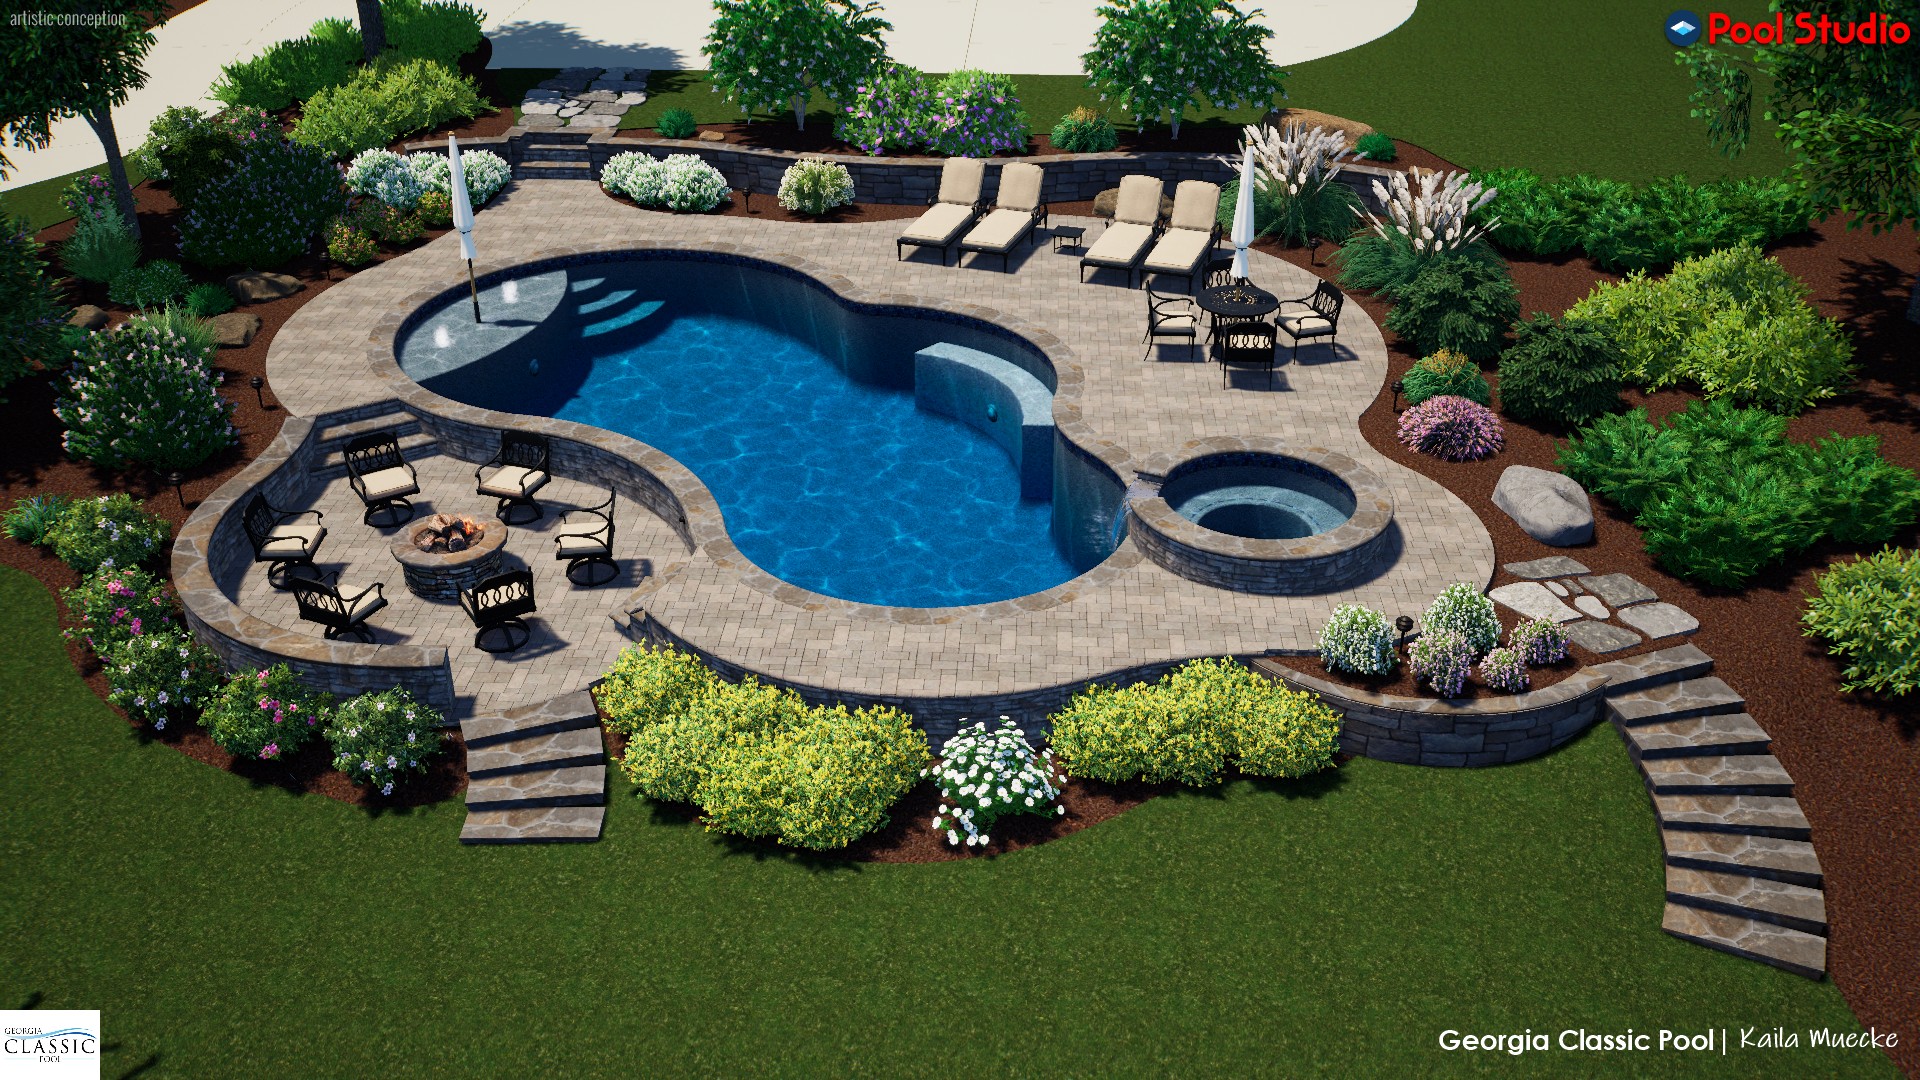 A 3D rendering of a modern pool with a spa and sunken firepit area surrounded by seating.